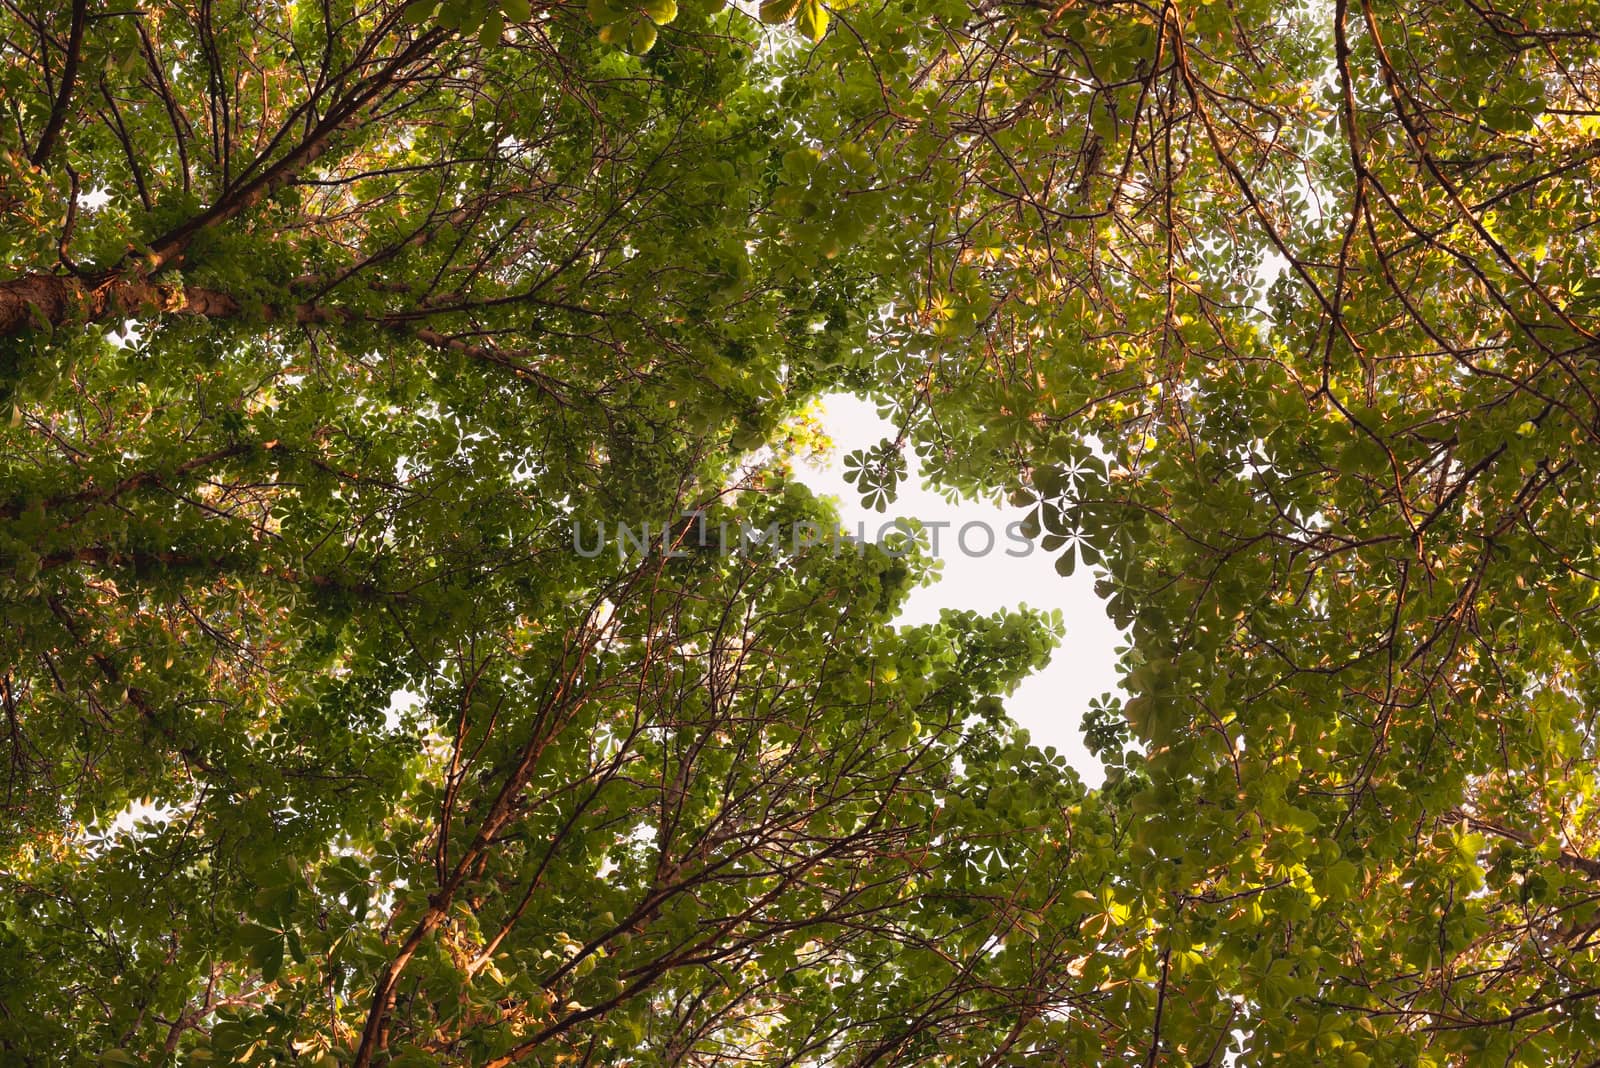 Looking up in Forest - Green Tree branches chestnut nature abstract background. branches gap in shape baby.